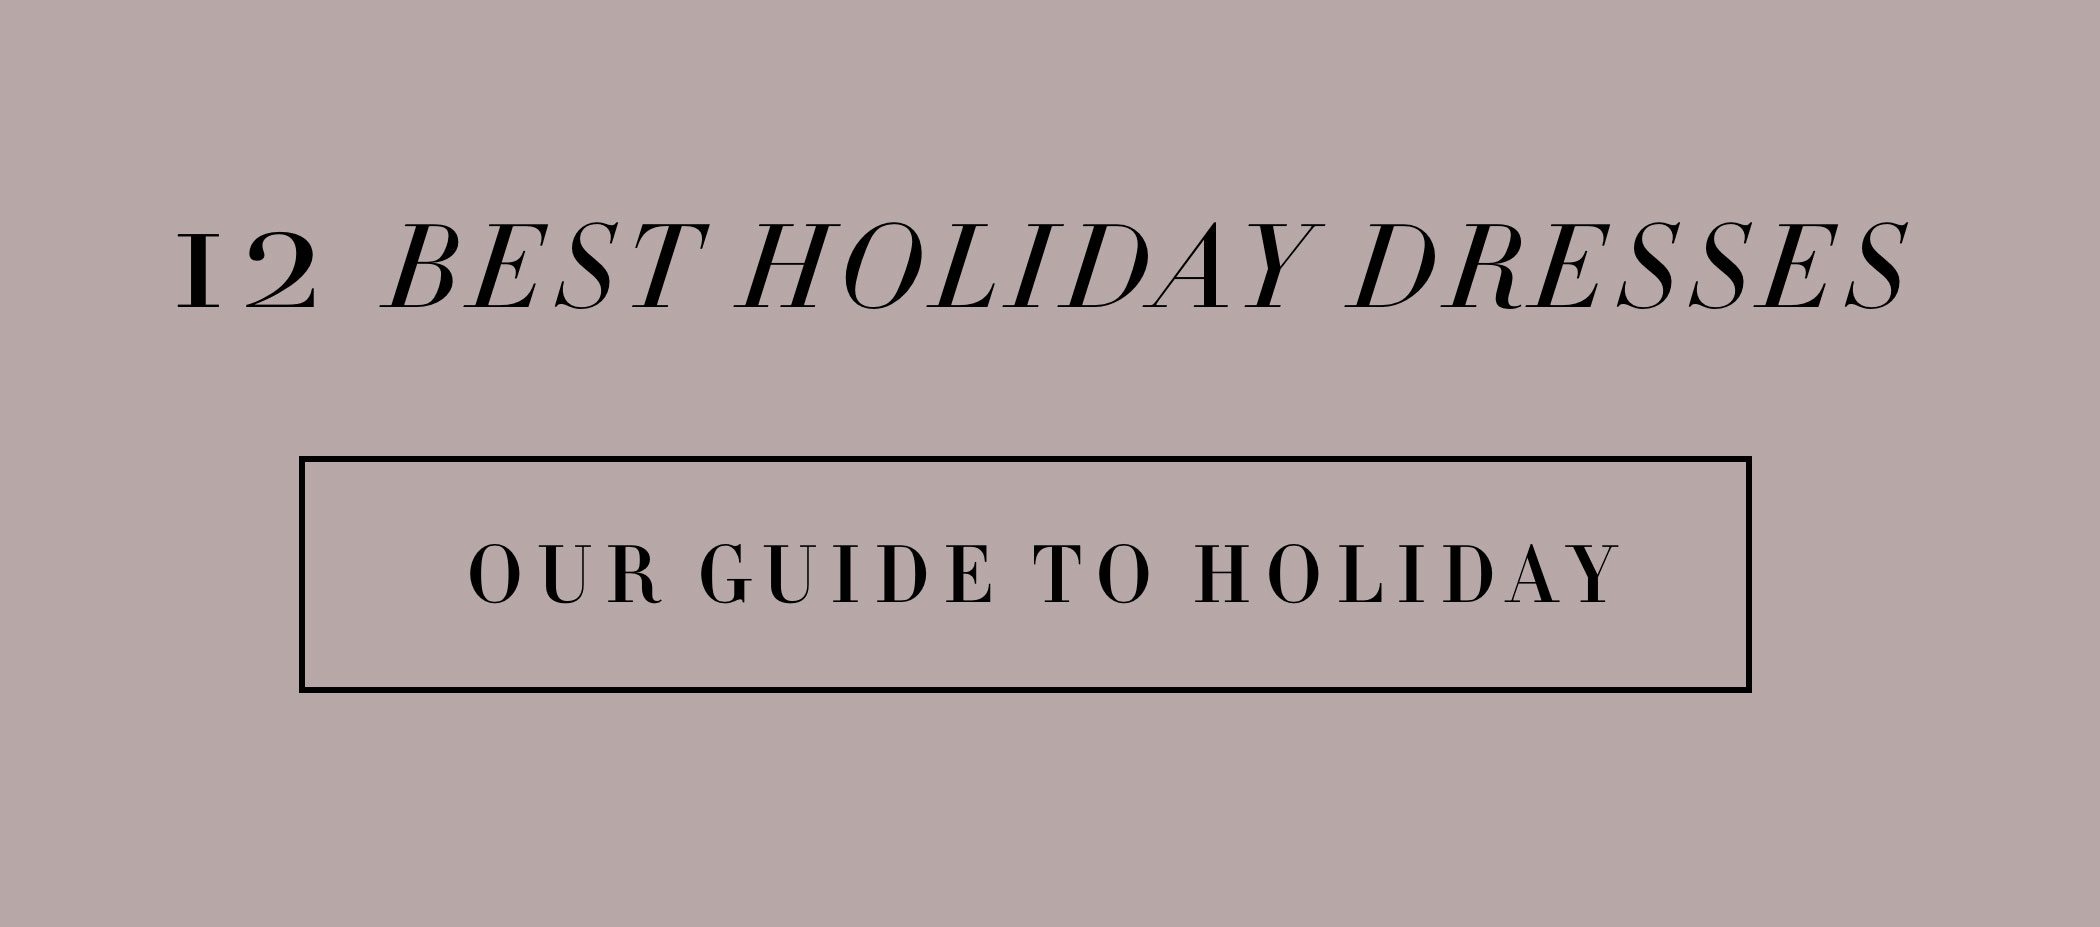 12 best holiday dresses